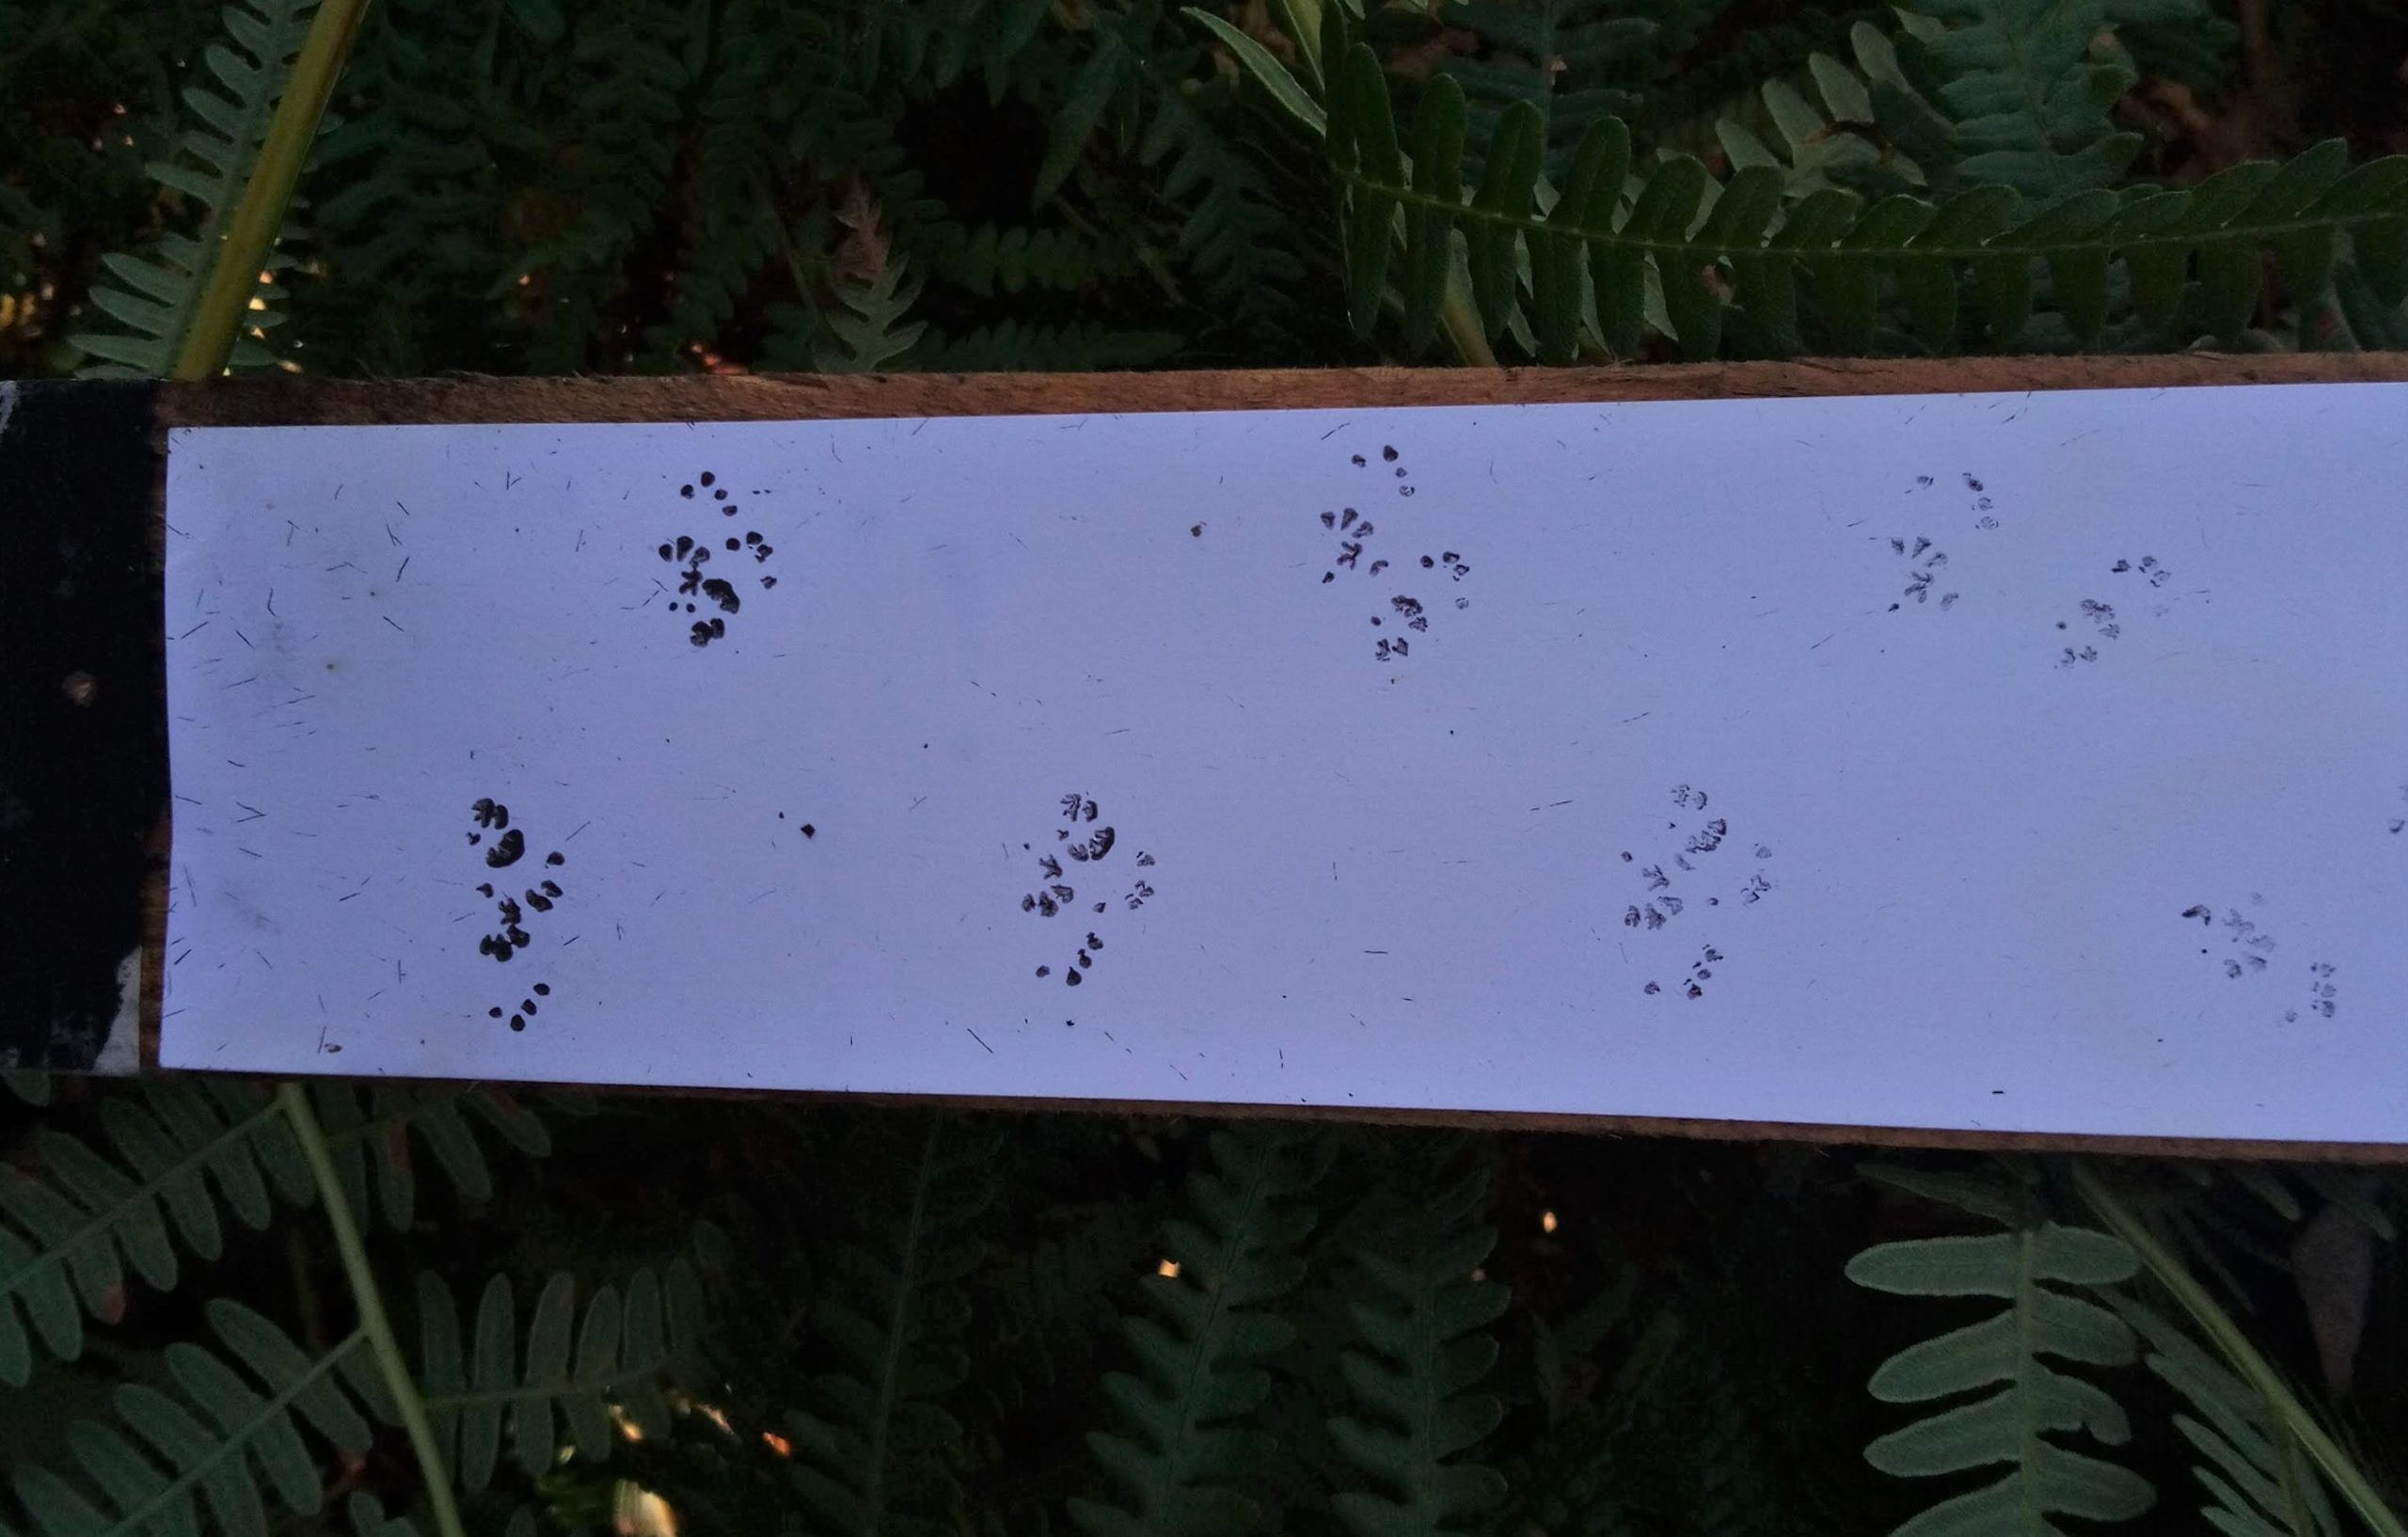 Dormouse prints in footprint tracking tunnel. By Matt Parkins